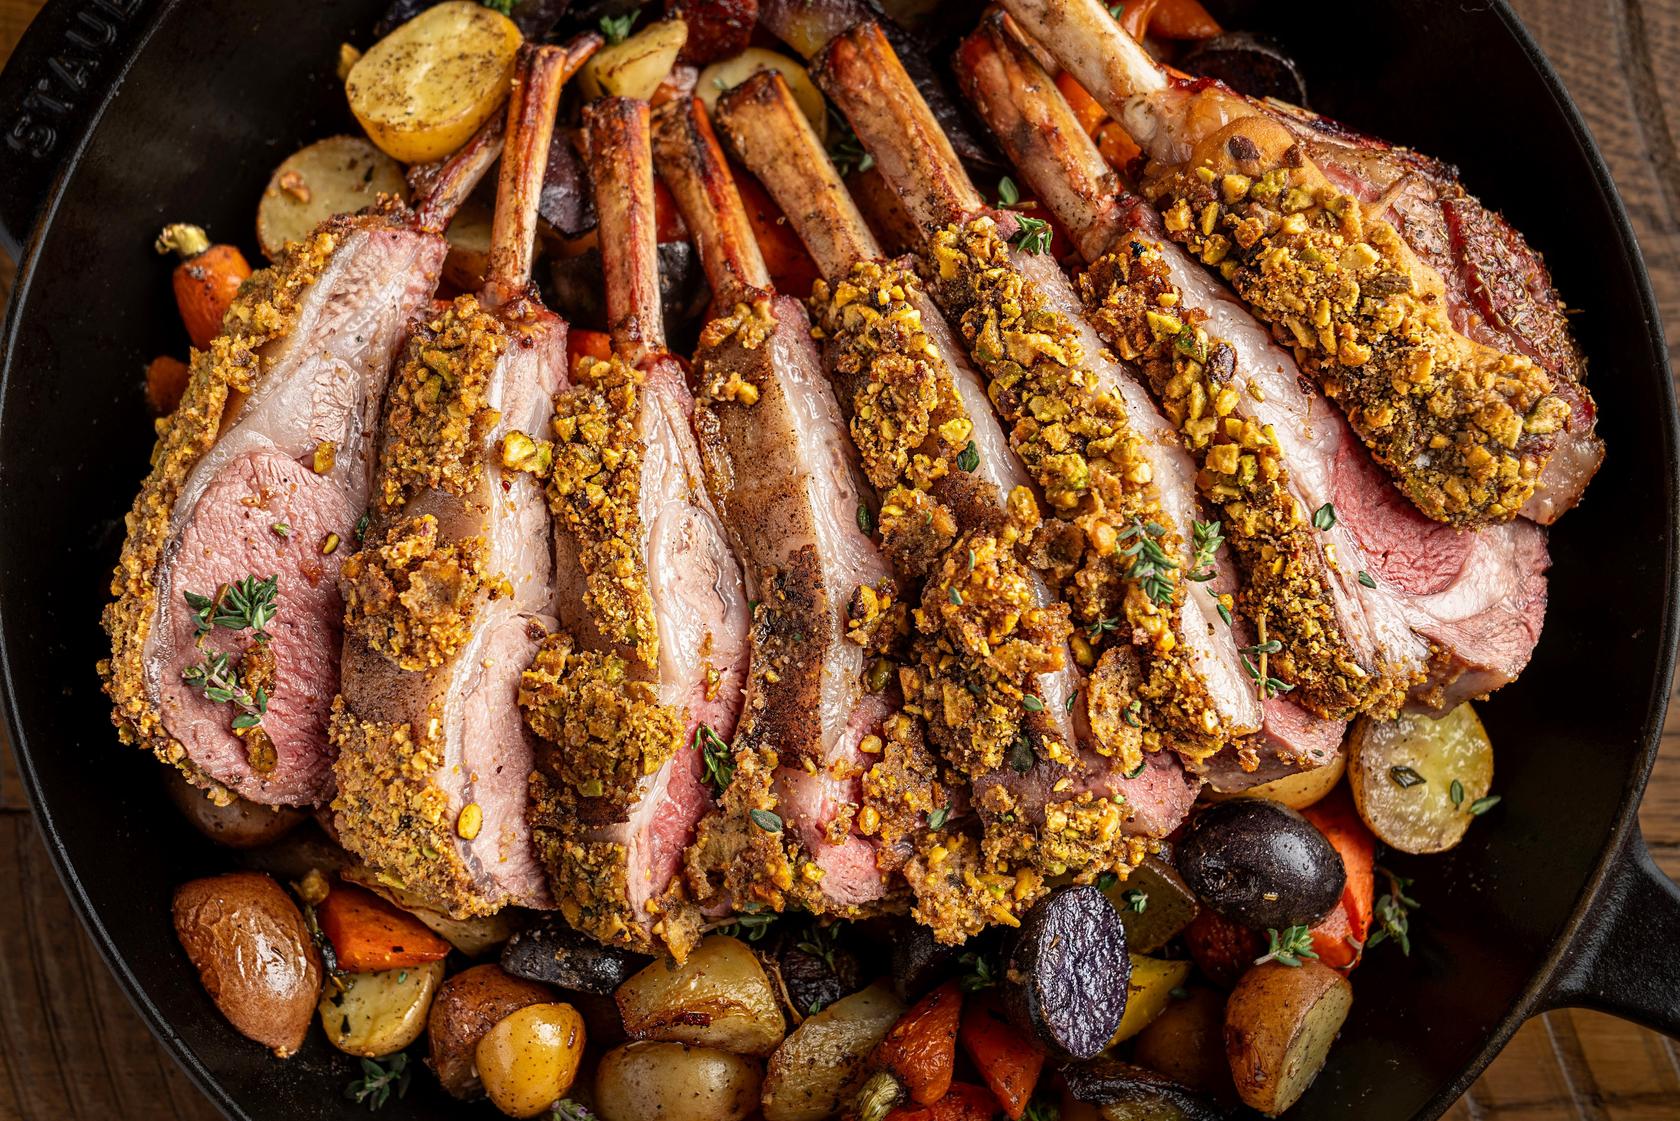 Pistachio Crusted Roasted Lamb with Vegetables